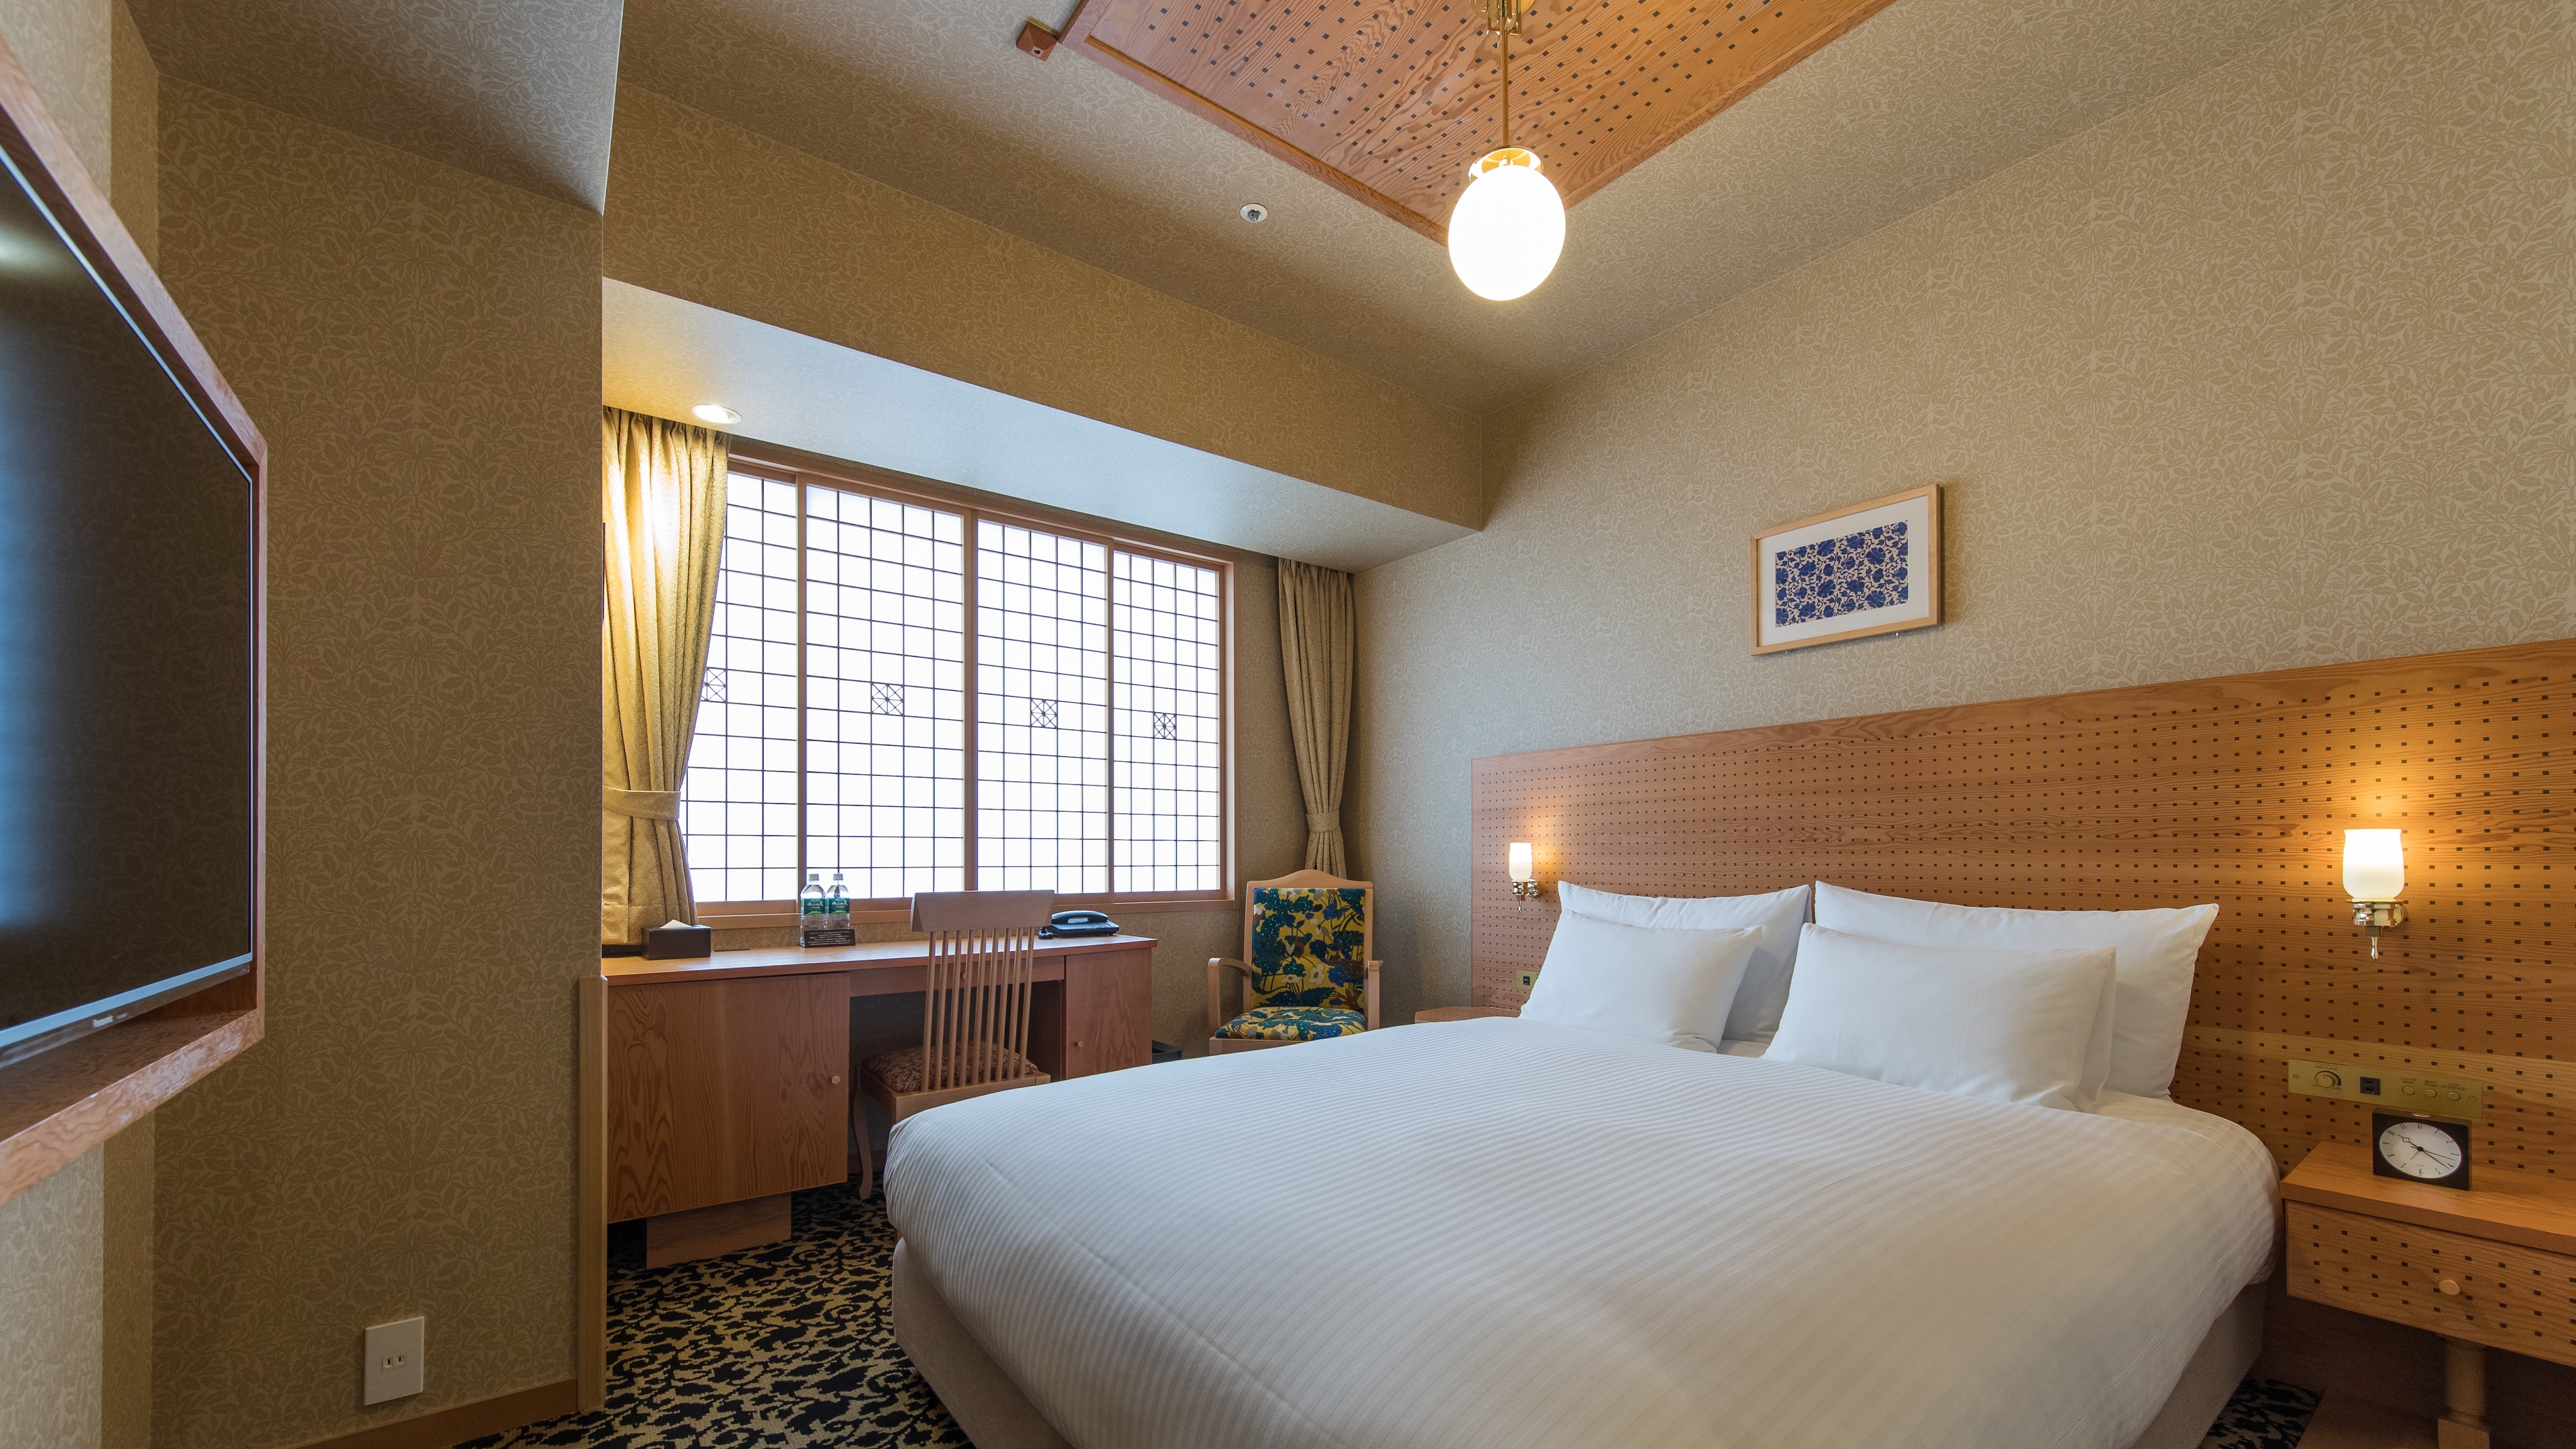 [Standard Double] This room is ideal for both sightseeing and business, allowing you to relax.